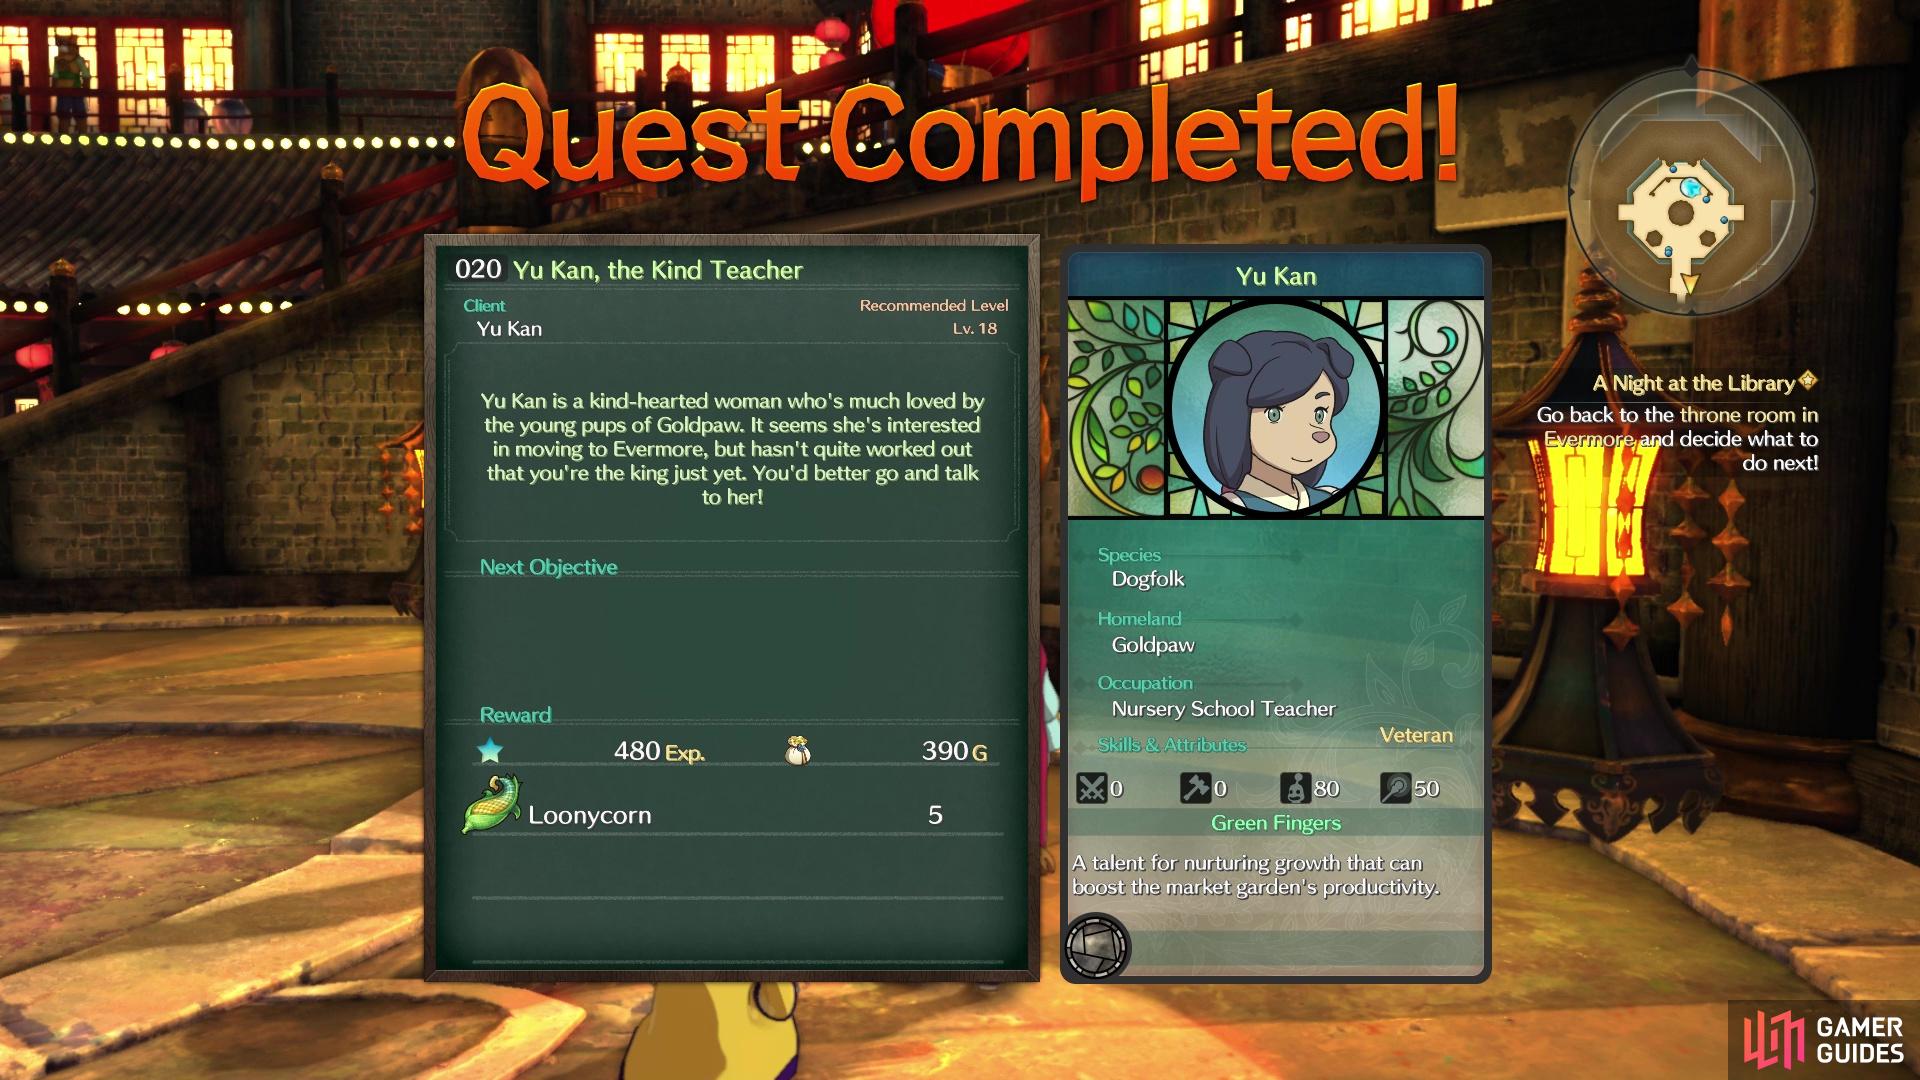 Sidequest 020 gives you the Loonycorn needed to finish Alice's quest